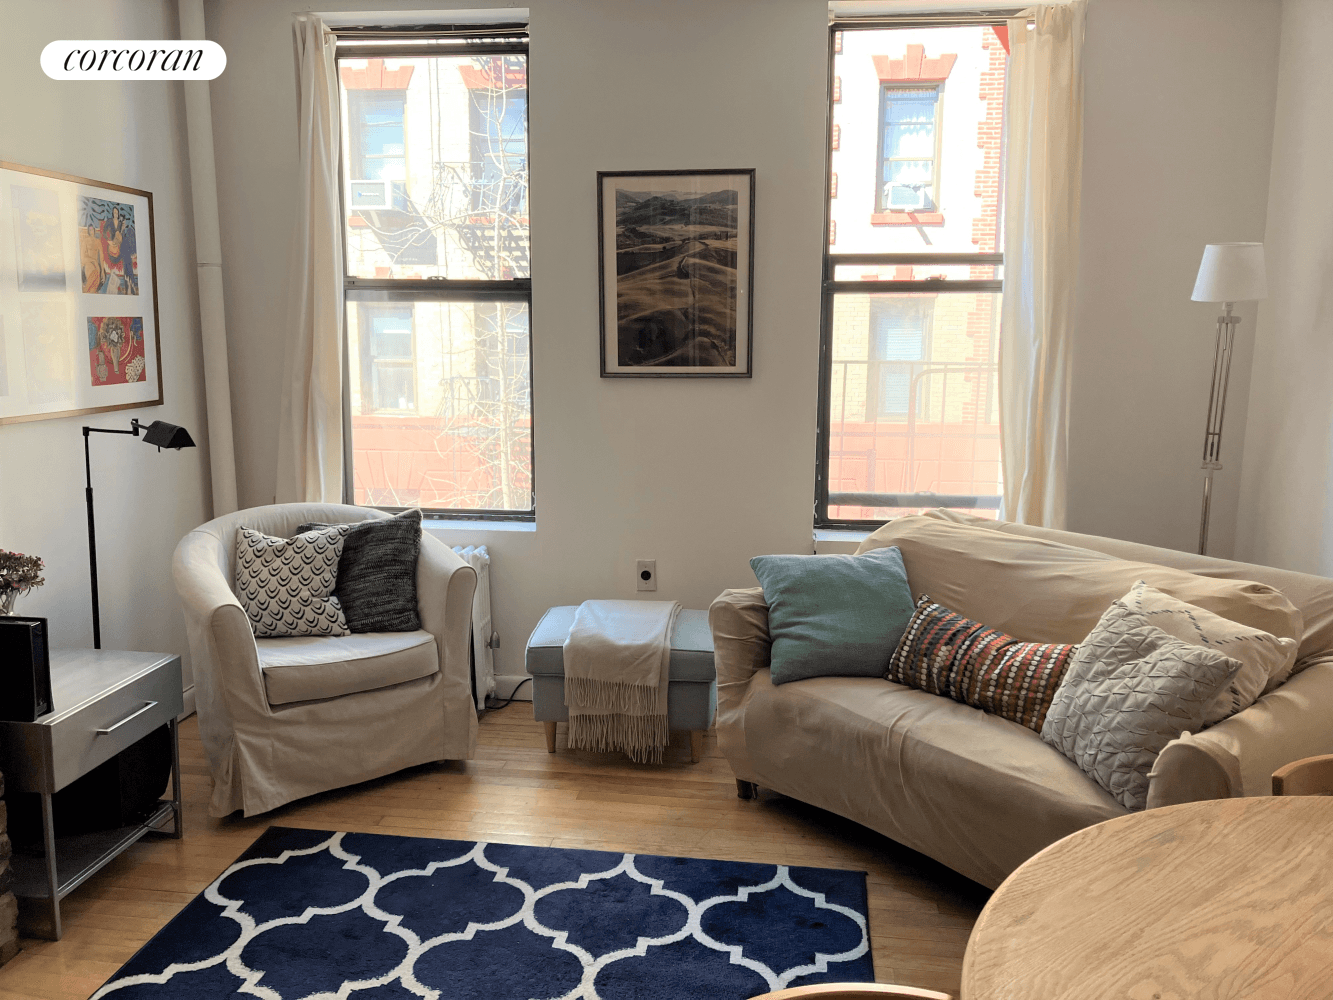 This lovely and quiet apartment is located in the heart of Greenwich Village.